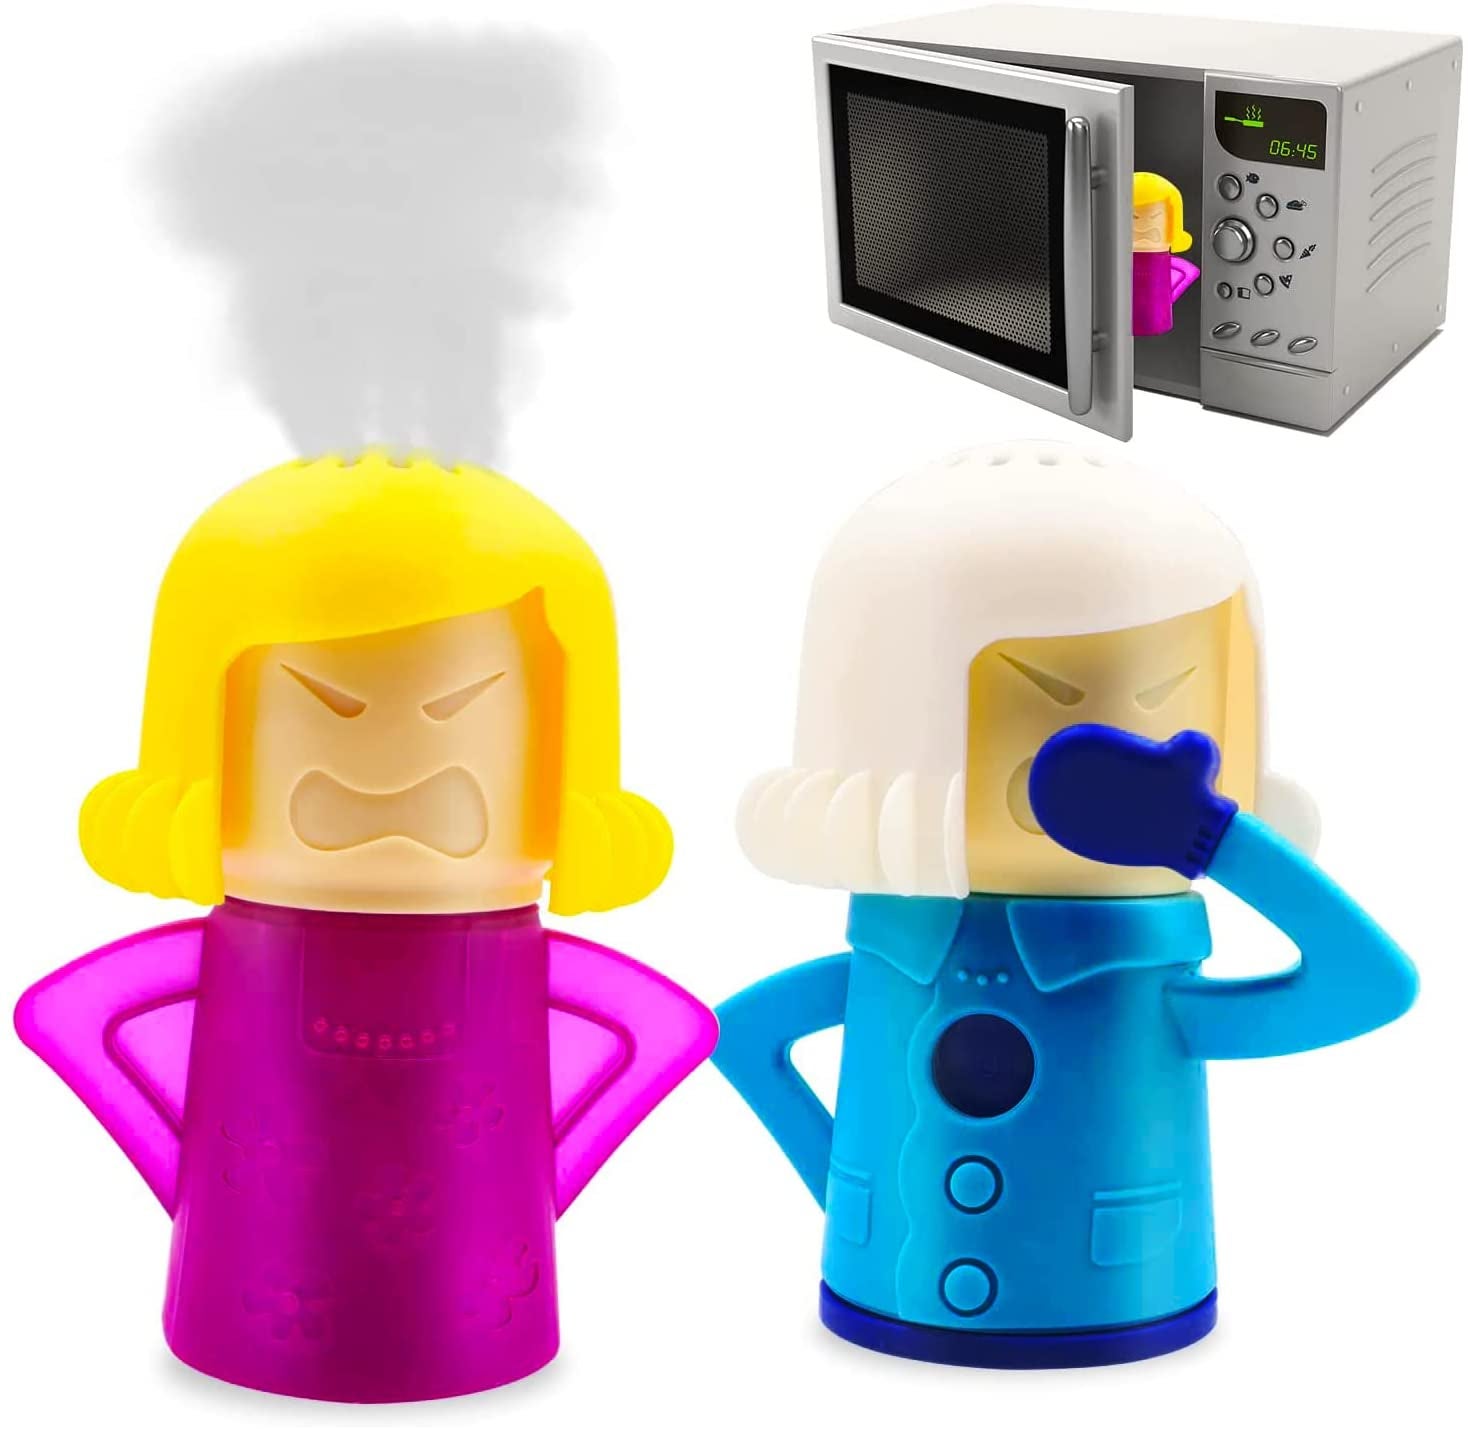 The Angry Mama Microwave Cleaner Makes Polishing Your Microwave